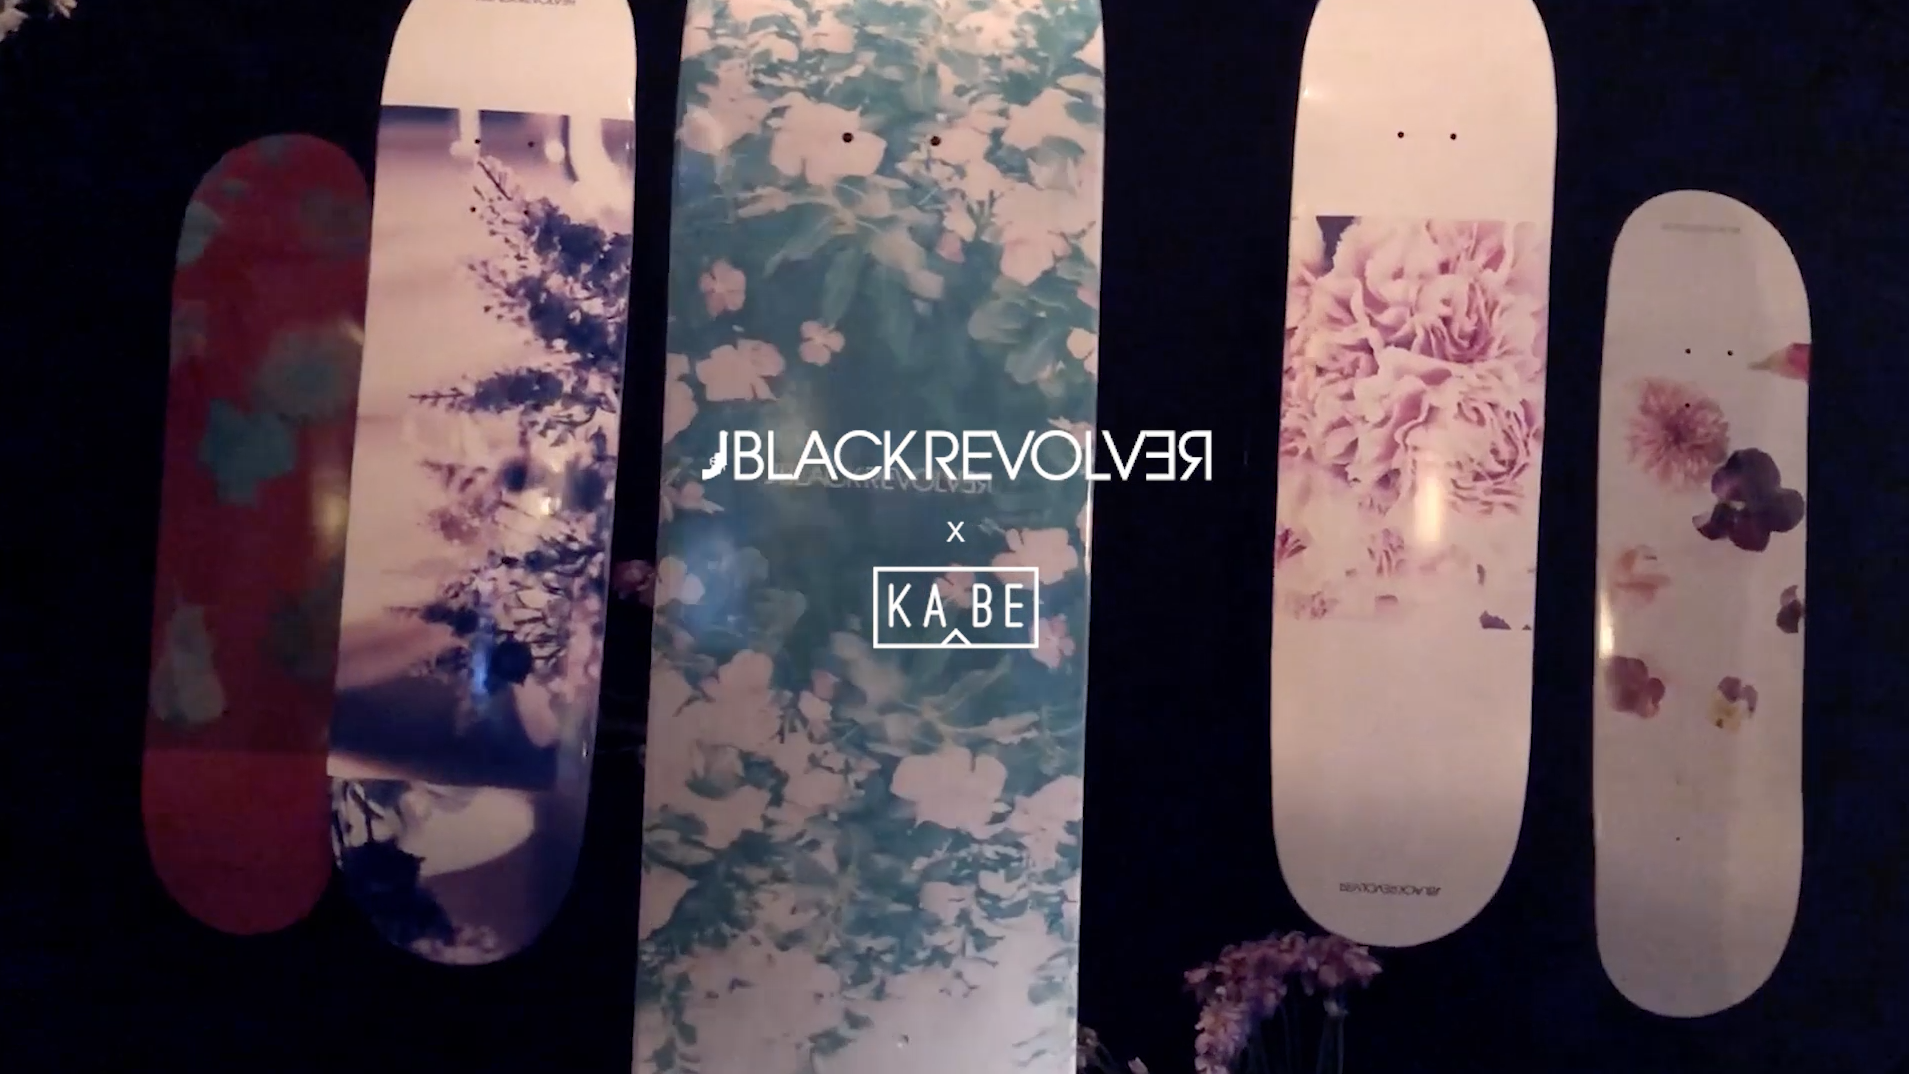 black revolver x kabe launch party